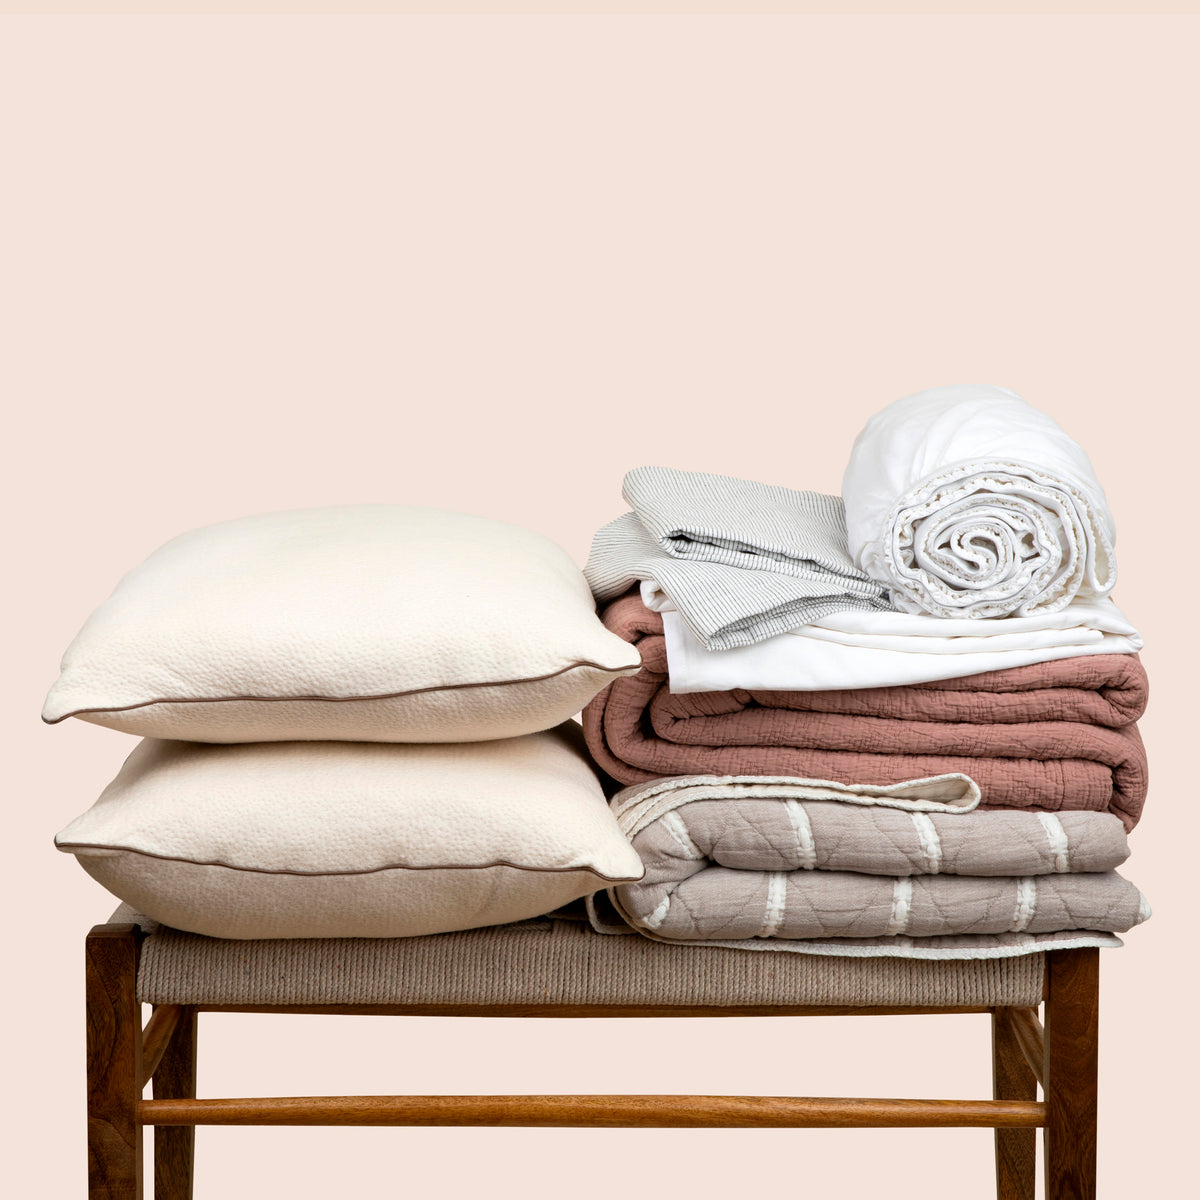 Image showcasing the complete Heritage Bundle neatly folded on a bench. The set showcases: two Kapok pillows stacked on each other on the left side of the bench and a stack including: White Blended Linen Sheets, Pinstripe Relaxed Hemp Pillowcases, a Pink Sandstone Wave Coverlet, and a reversible gray and white striped Heritage Quilt on the right side. 